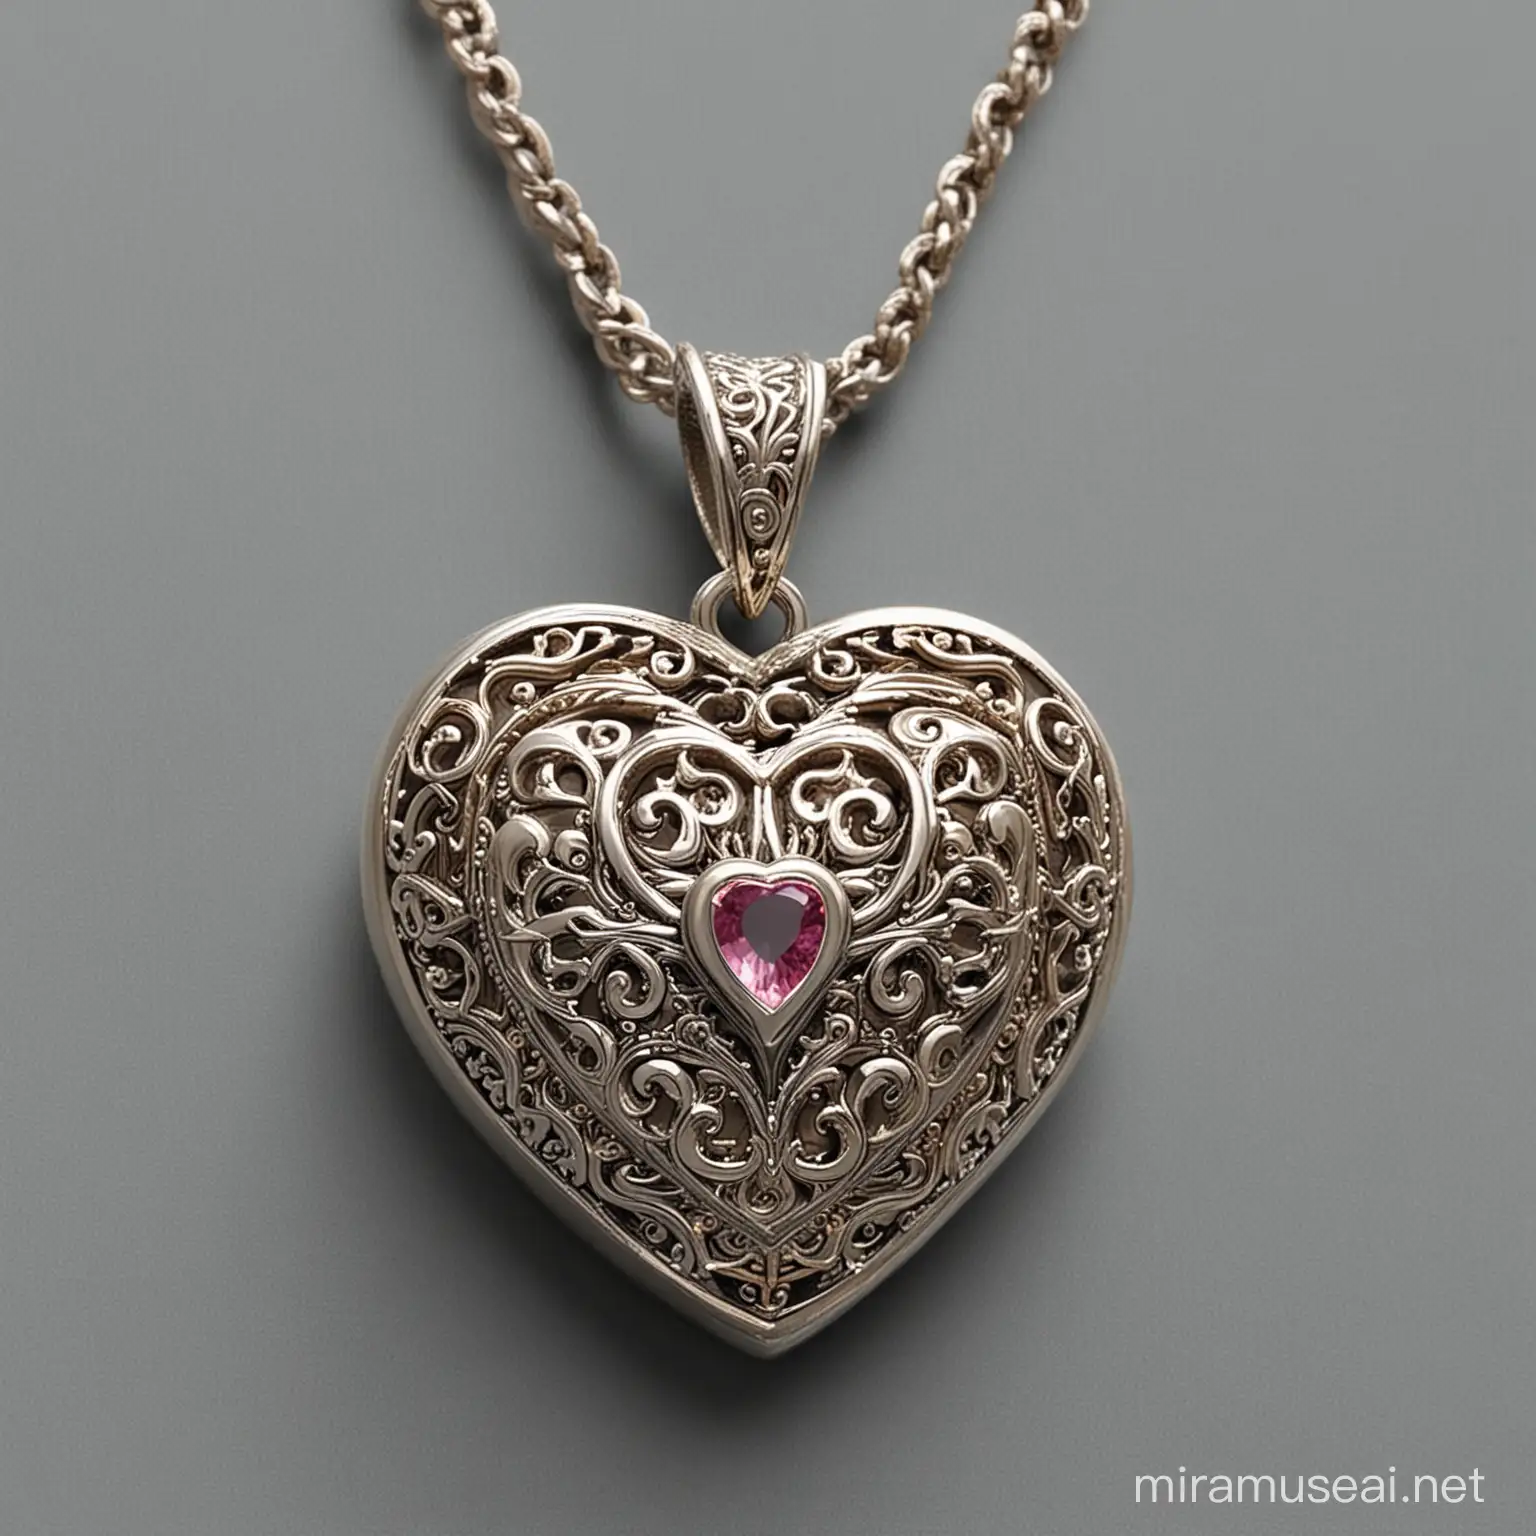  Heart-shaped pendant: Create a pendant in the shape of a heart, with intricate detailing inside the heart to depict the human heart. You can add subtle engravings or small gemstones to represent the divine love of God.